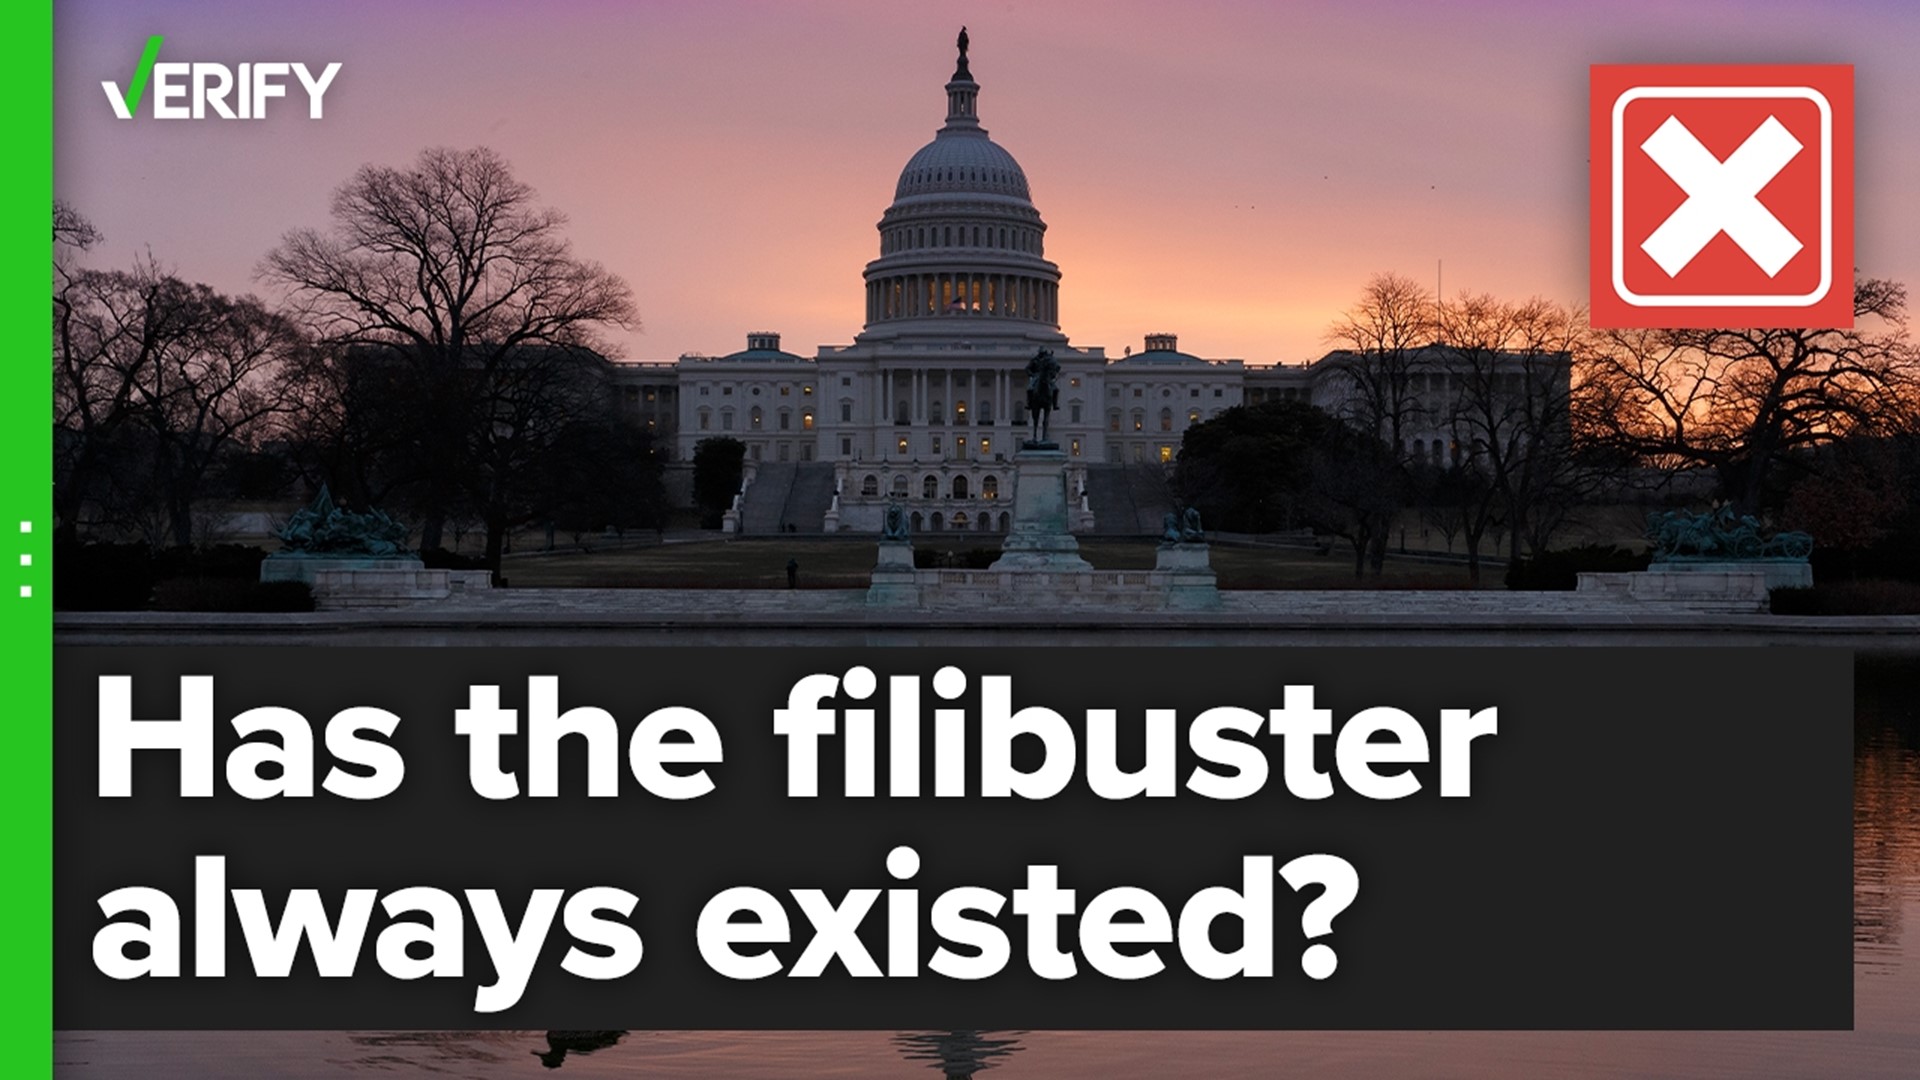 Has the Senate always had the filibuster? The VERIFY team confirms this is false.